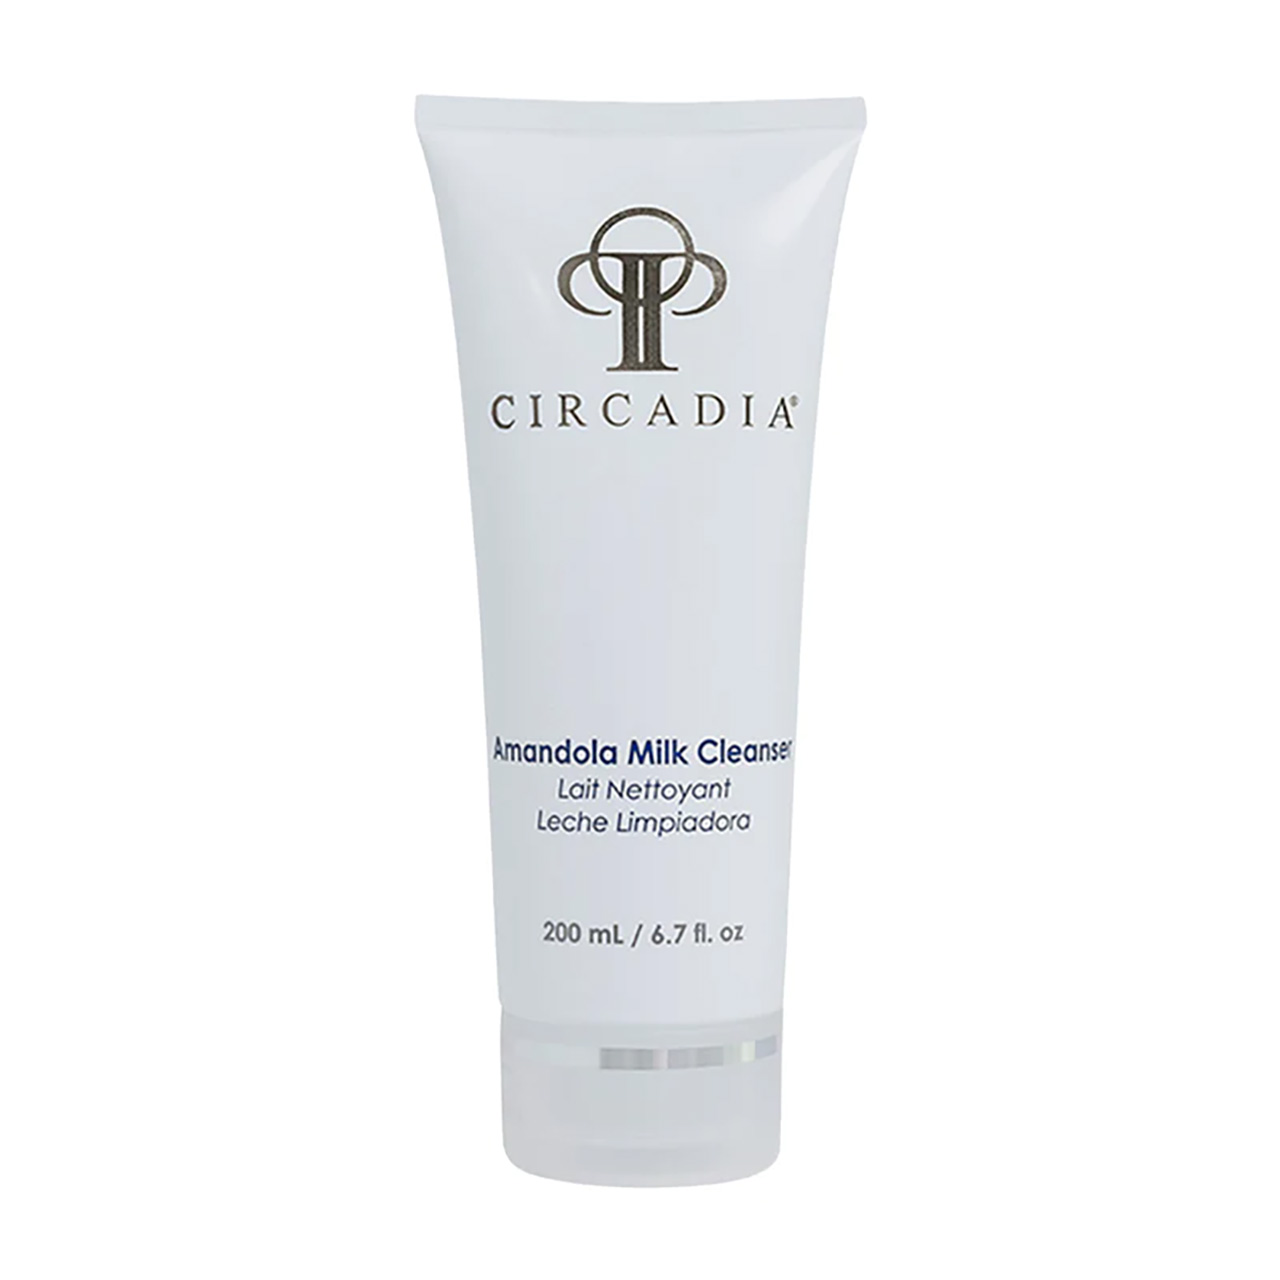 When you be restocking the circadia amandola cleanser in the professional size?